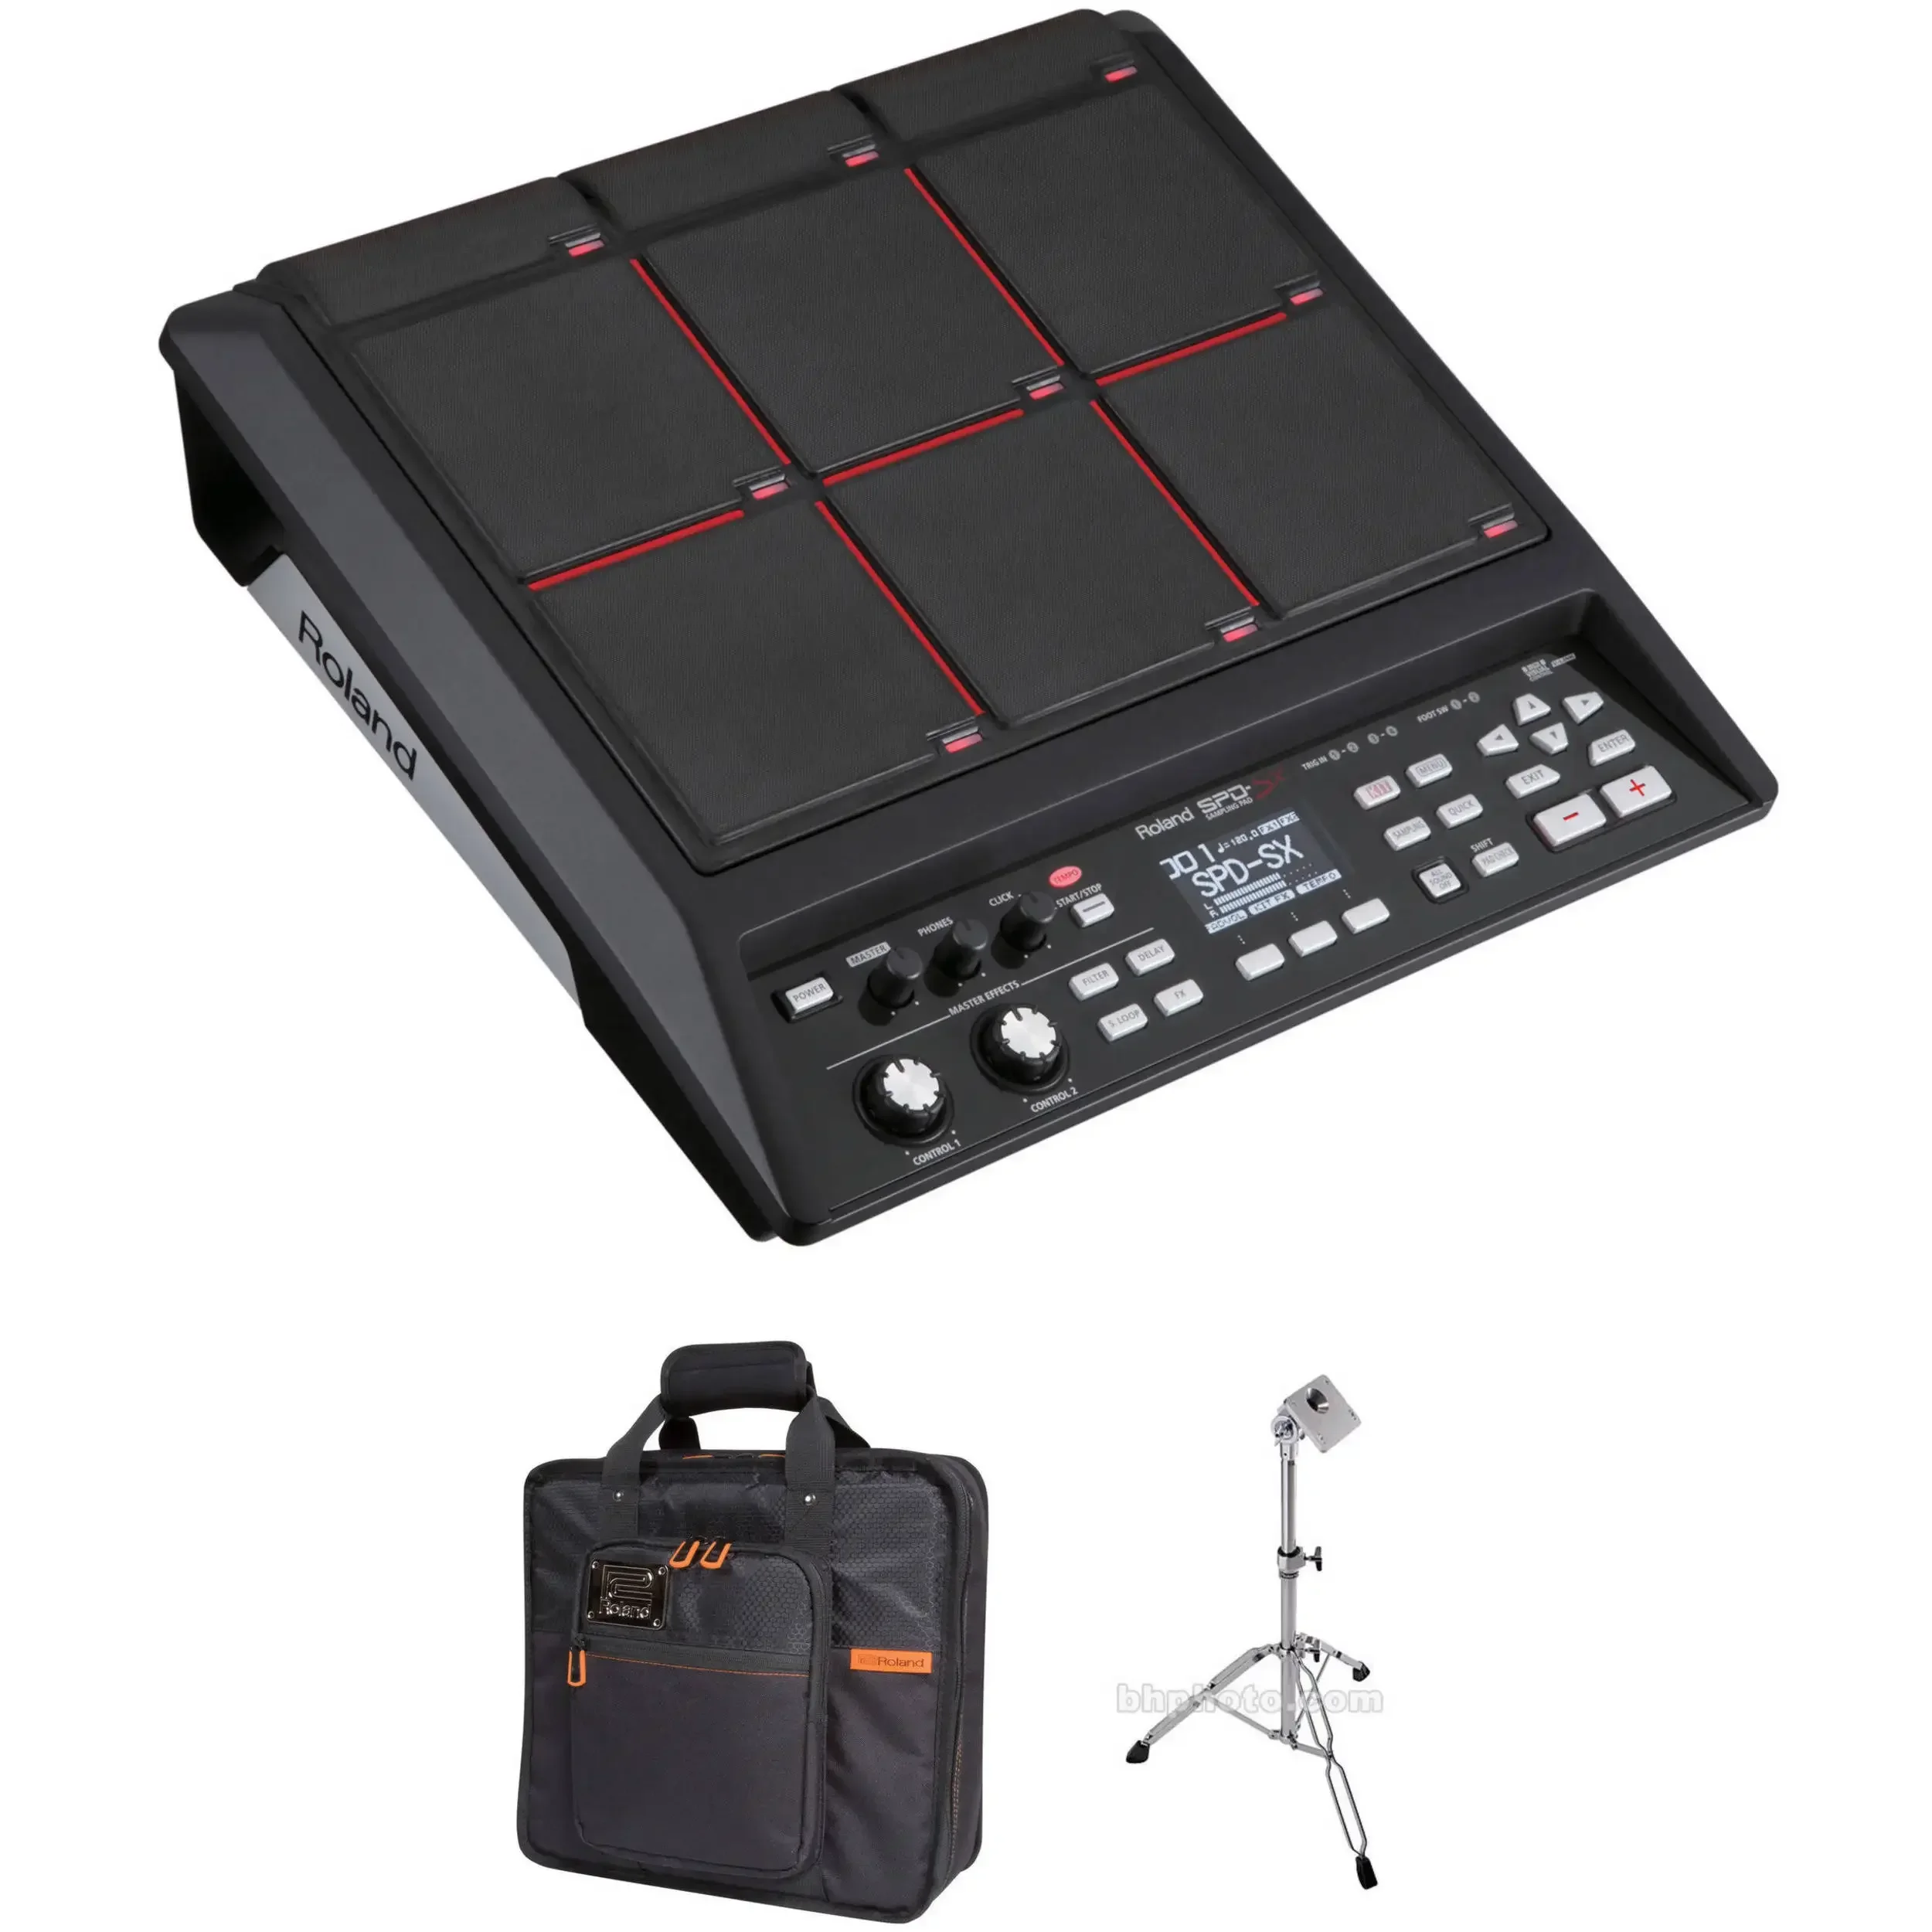 

SUMMER SALES DISCOUNT ON 100% NEW AUTHENTIC Roland SPD-SX Sampling Percussion Pad w/AC